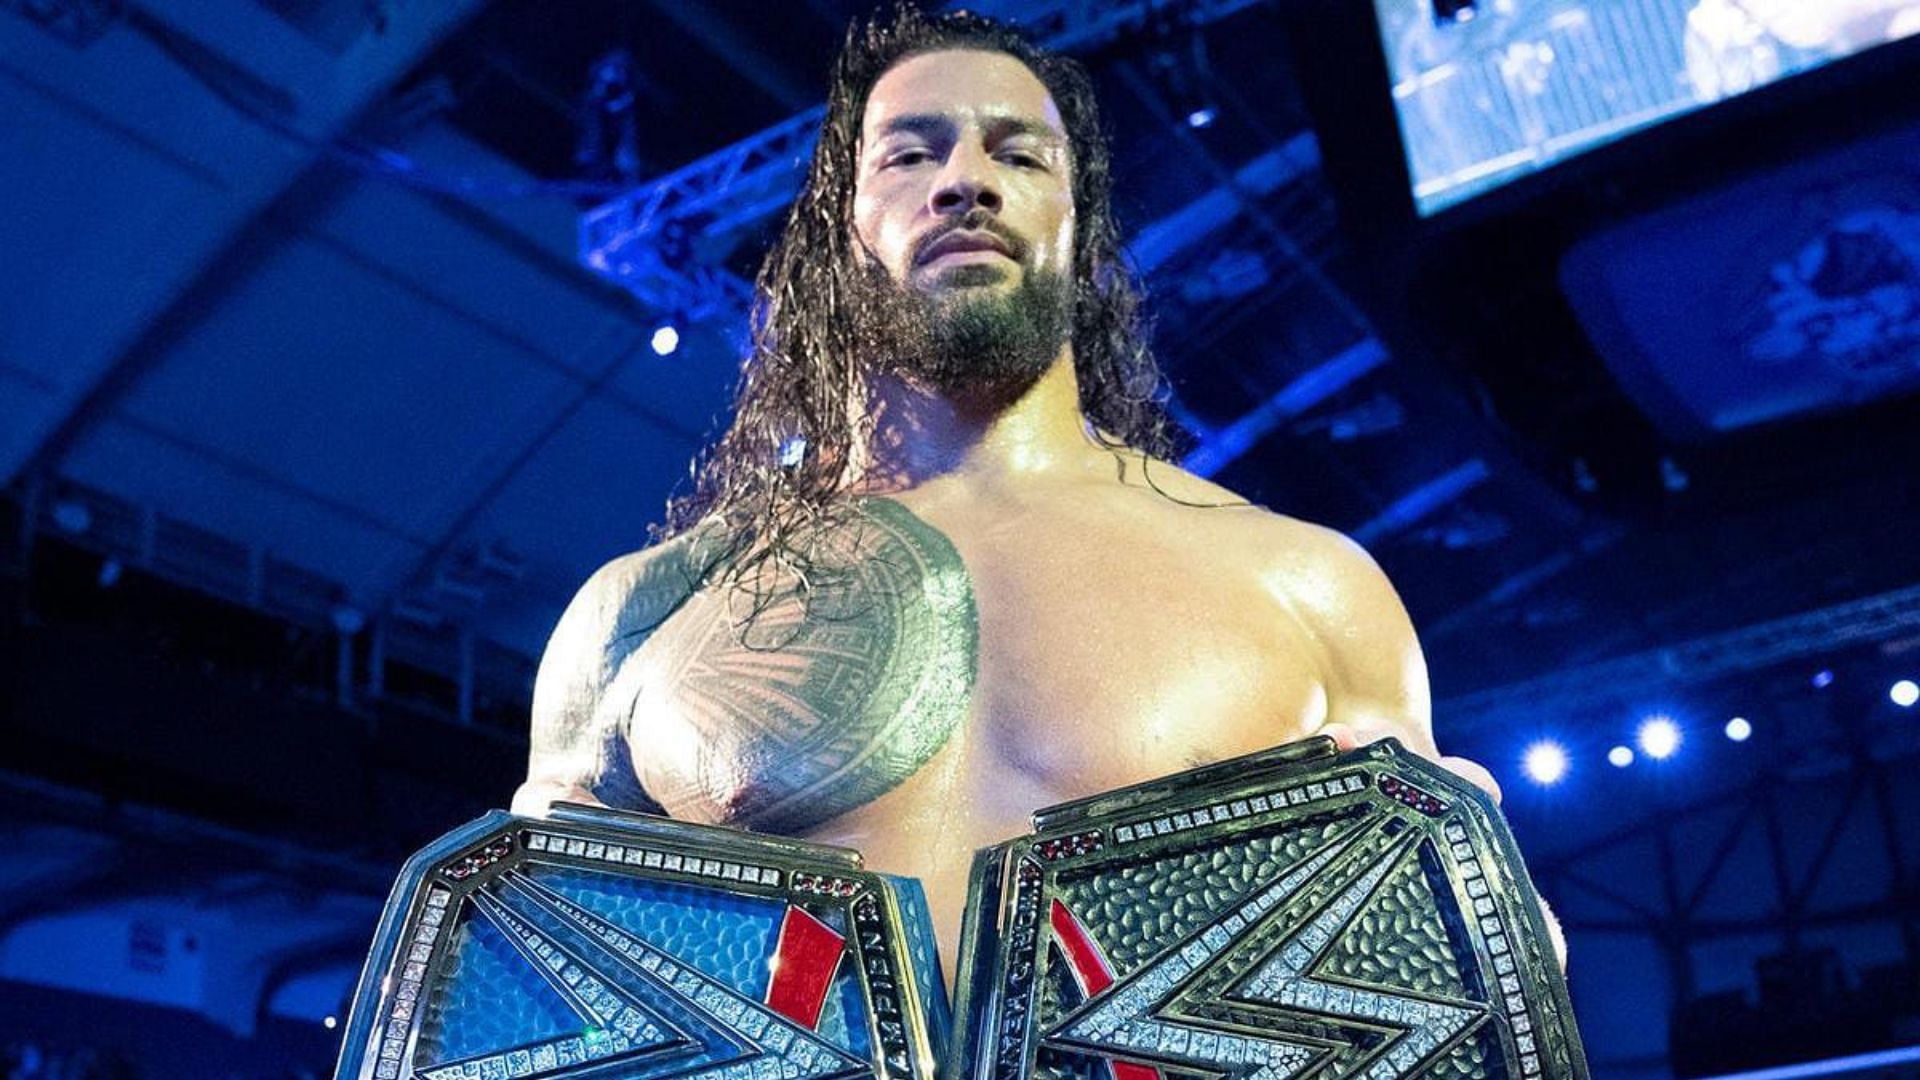 Which former AEW star could confront Roman Reigns on Smackdown?